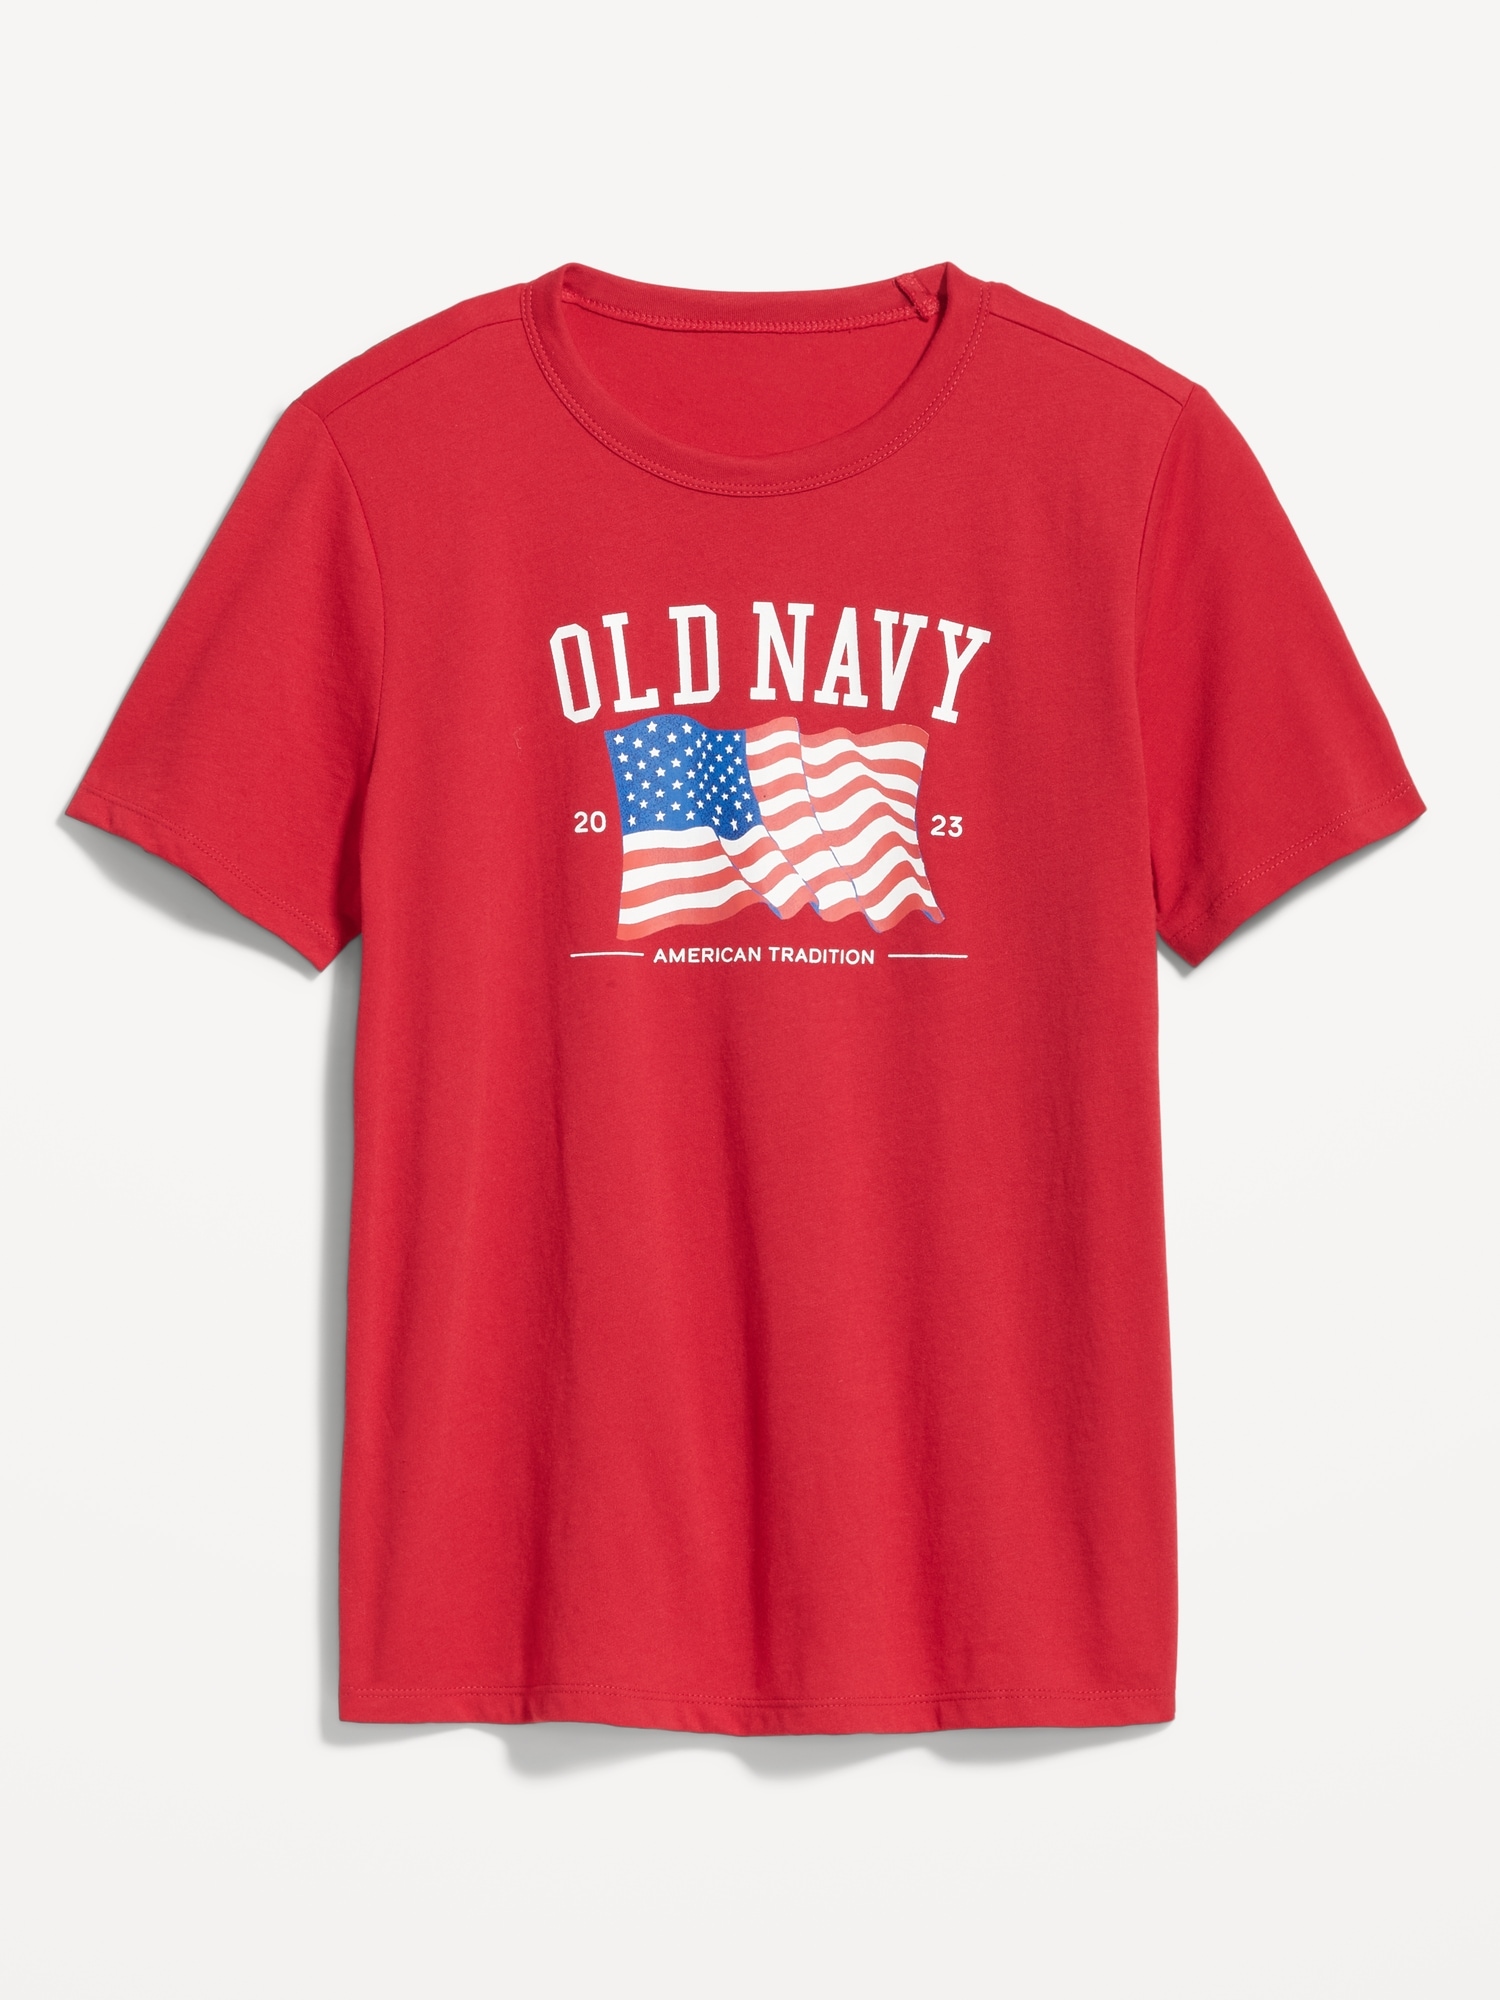 Matching "Old Navy" Flag TShirt for Women Old Navy